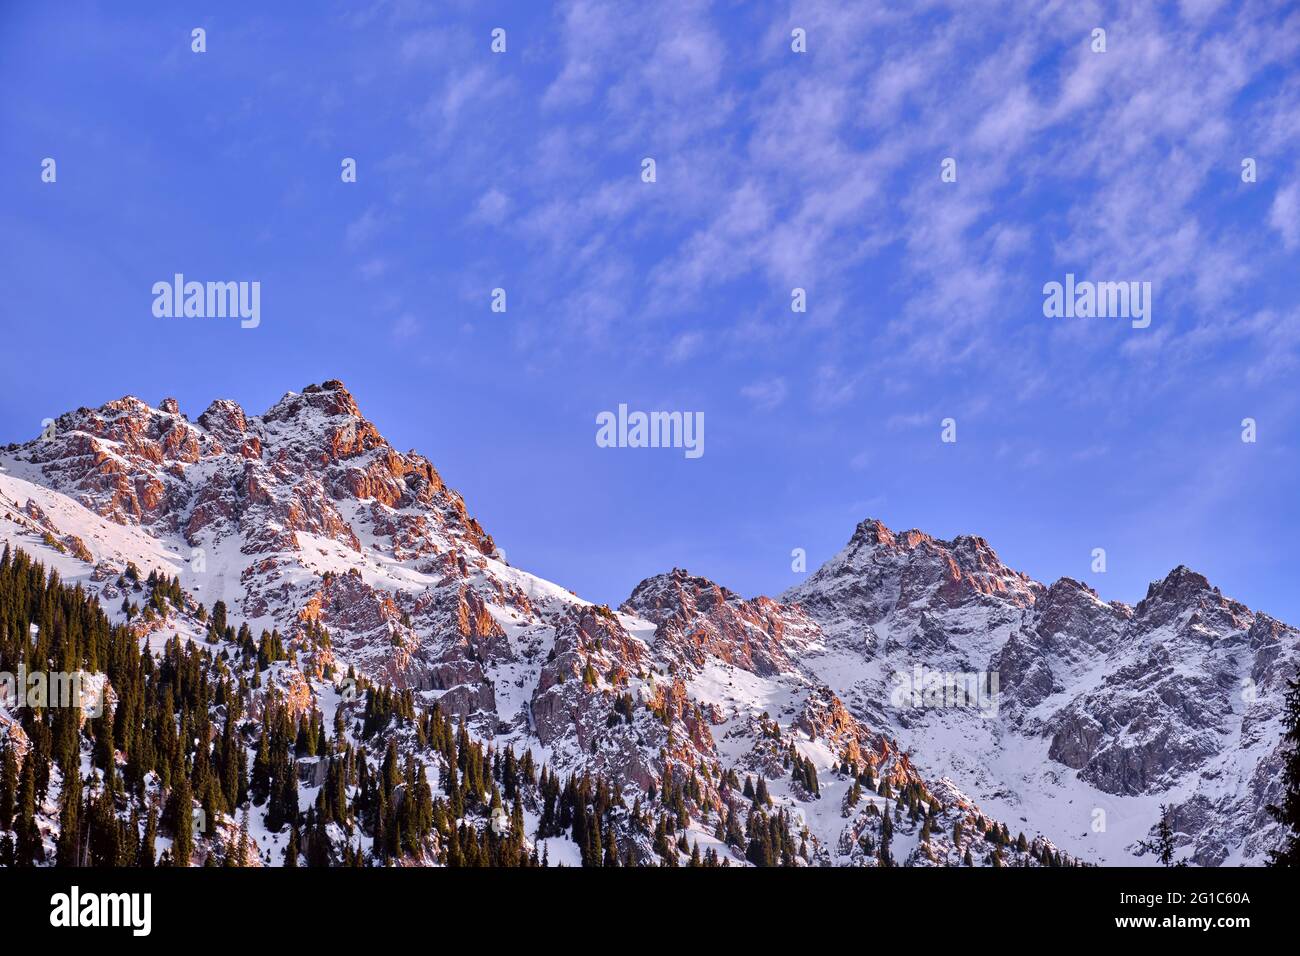 Majestic rocky peaks with fir forest against a blue sky with clouds at sunset in the winter season Stock Photo